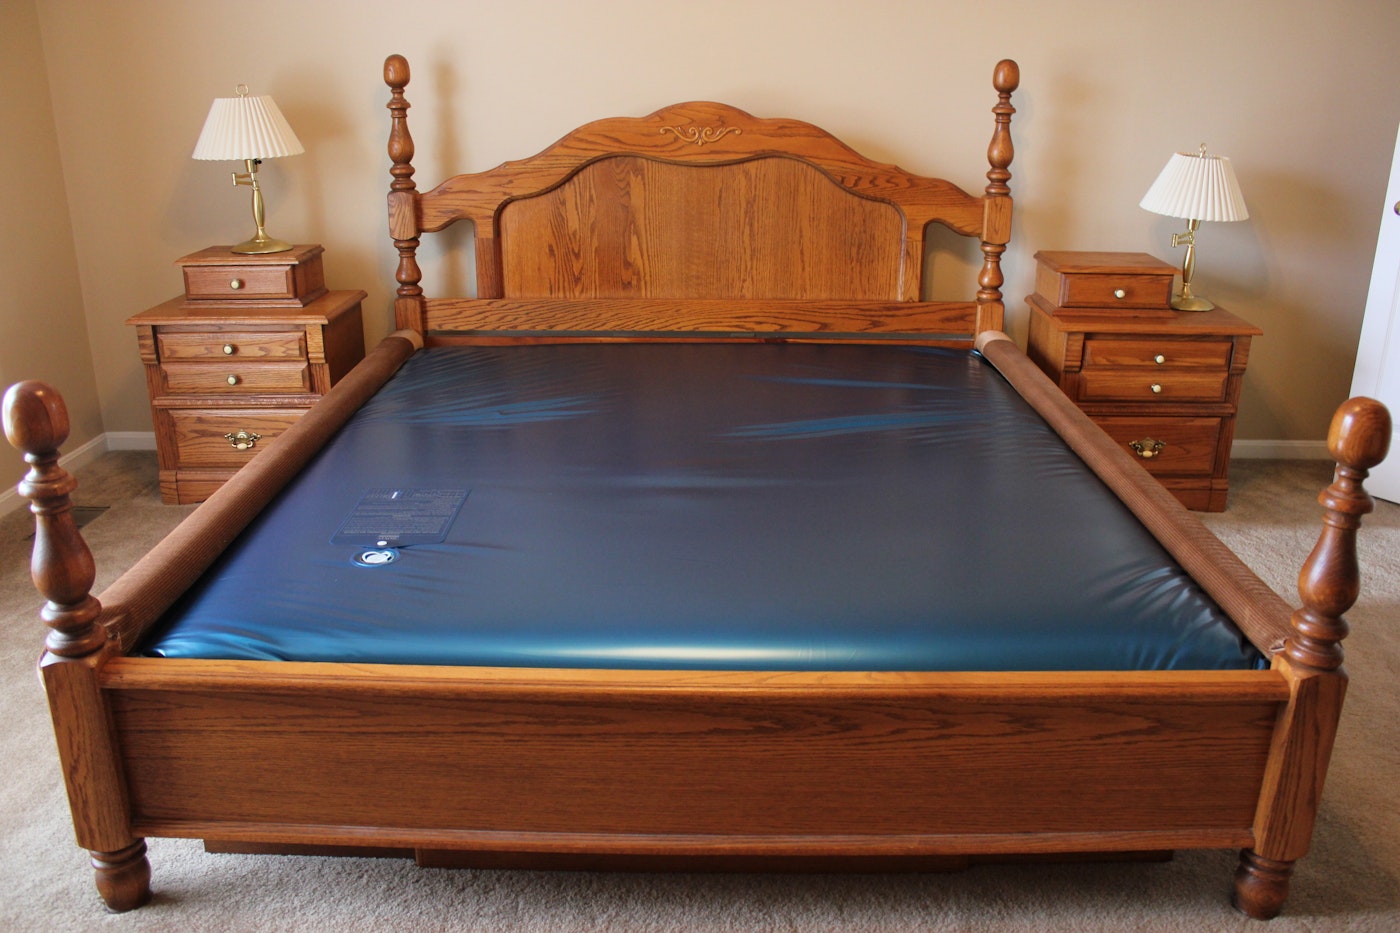 a king size waterbed mattress measures 5.5